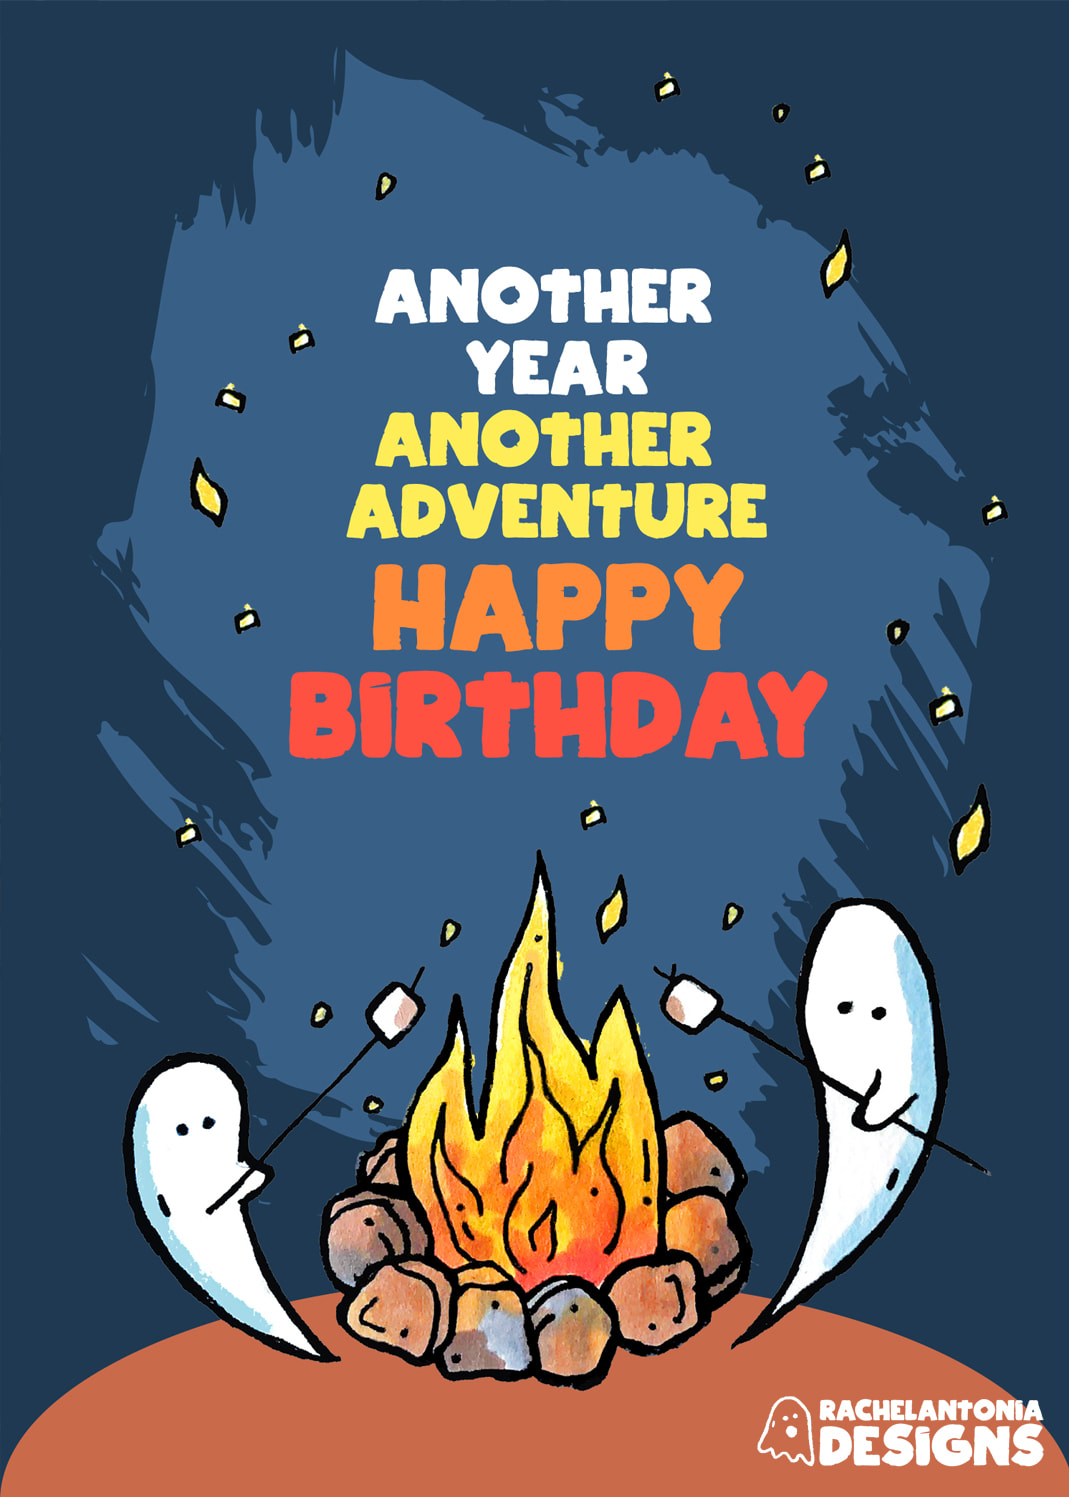 Image of a card with two ghosts around a campfire that says another year another adventure happy birthday